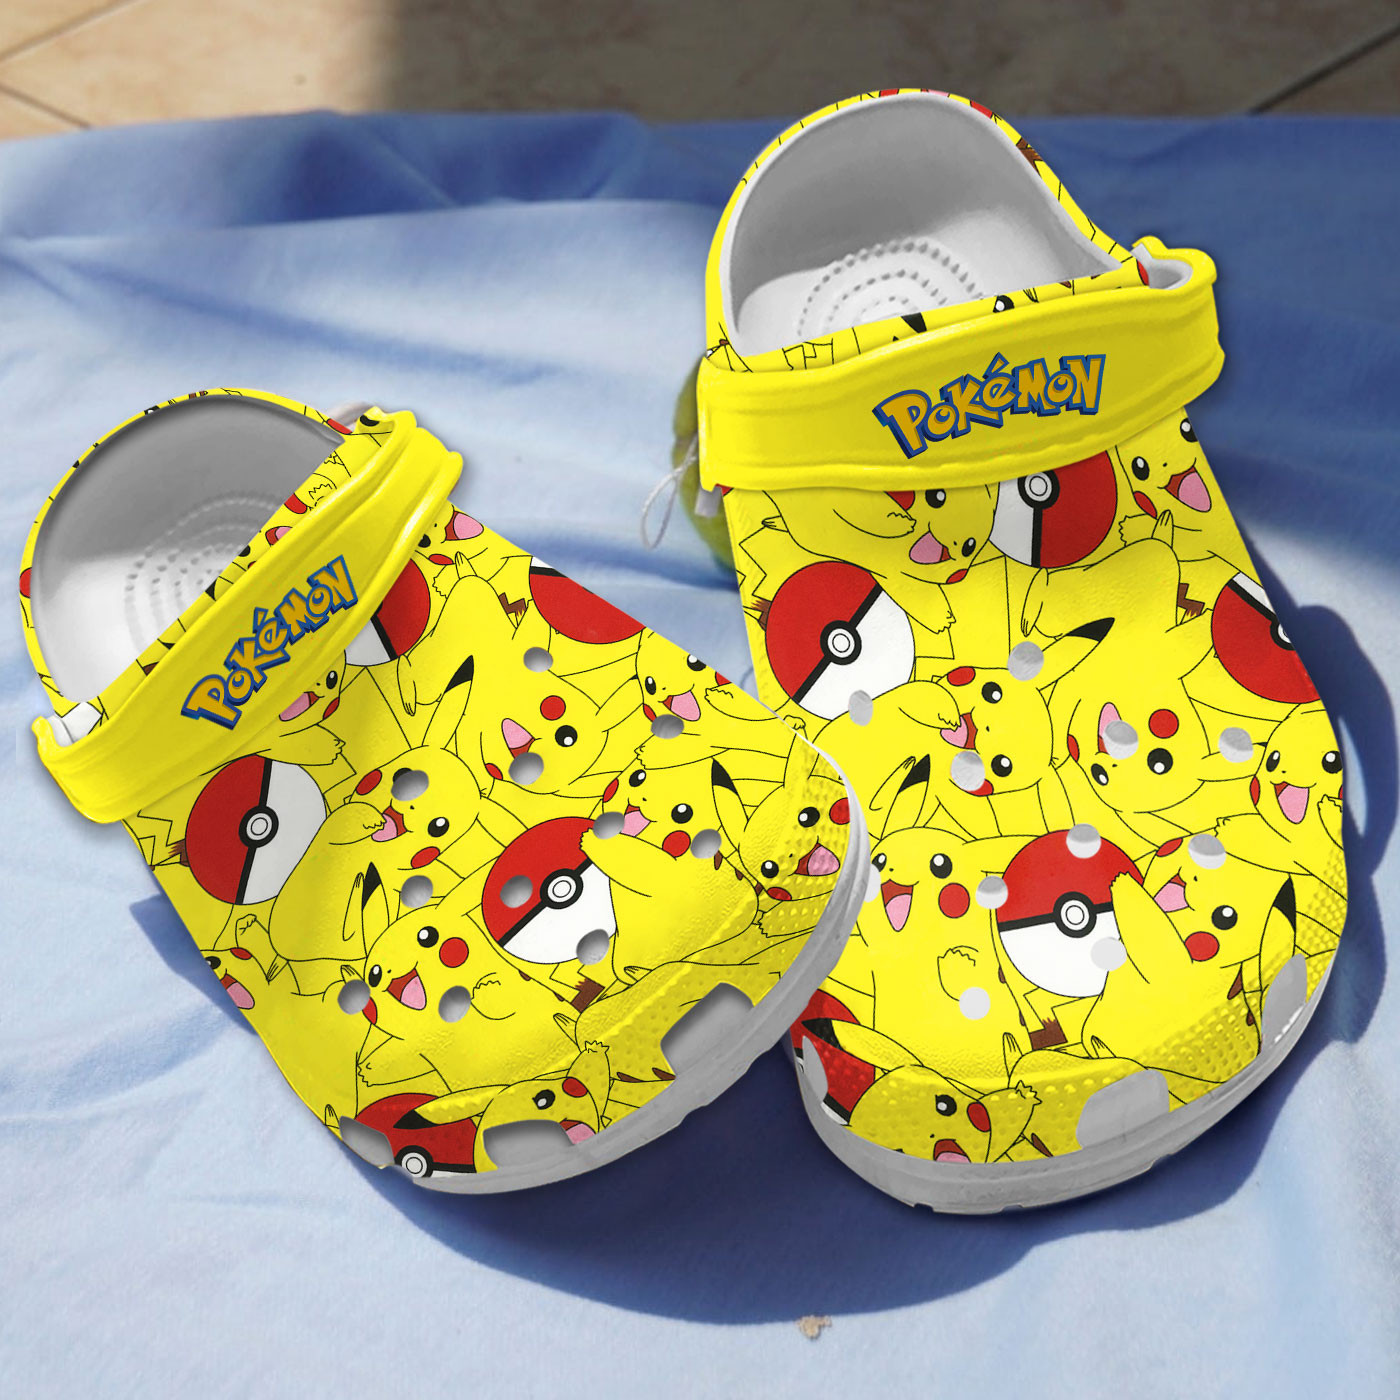 GSB2010201 2 1, Special Design And Funny Pokemon Pikachu Pokeball Crocs, Easy To Buy, Funny, Special